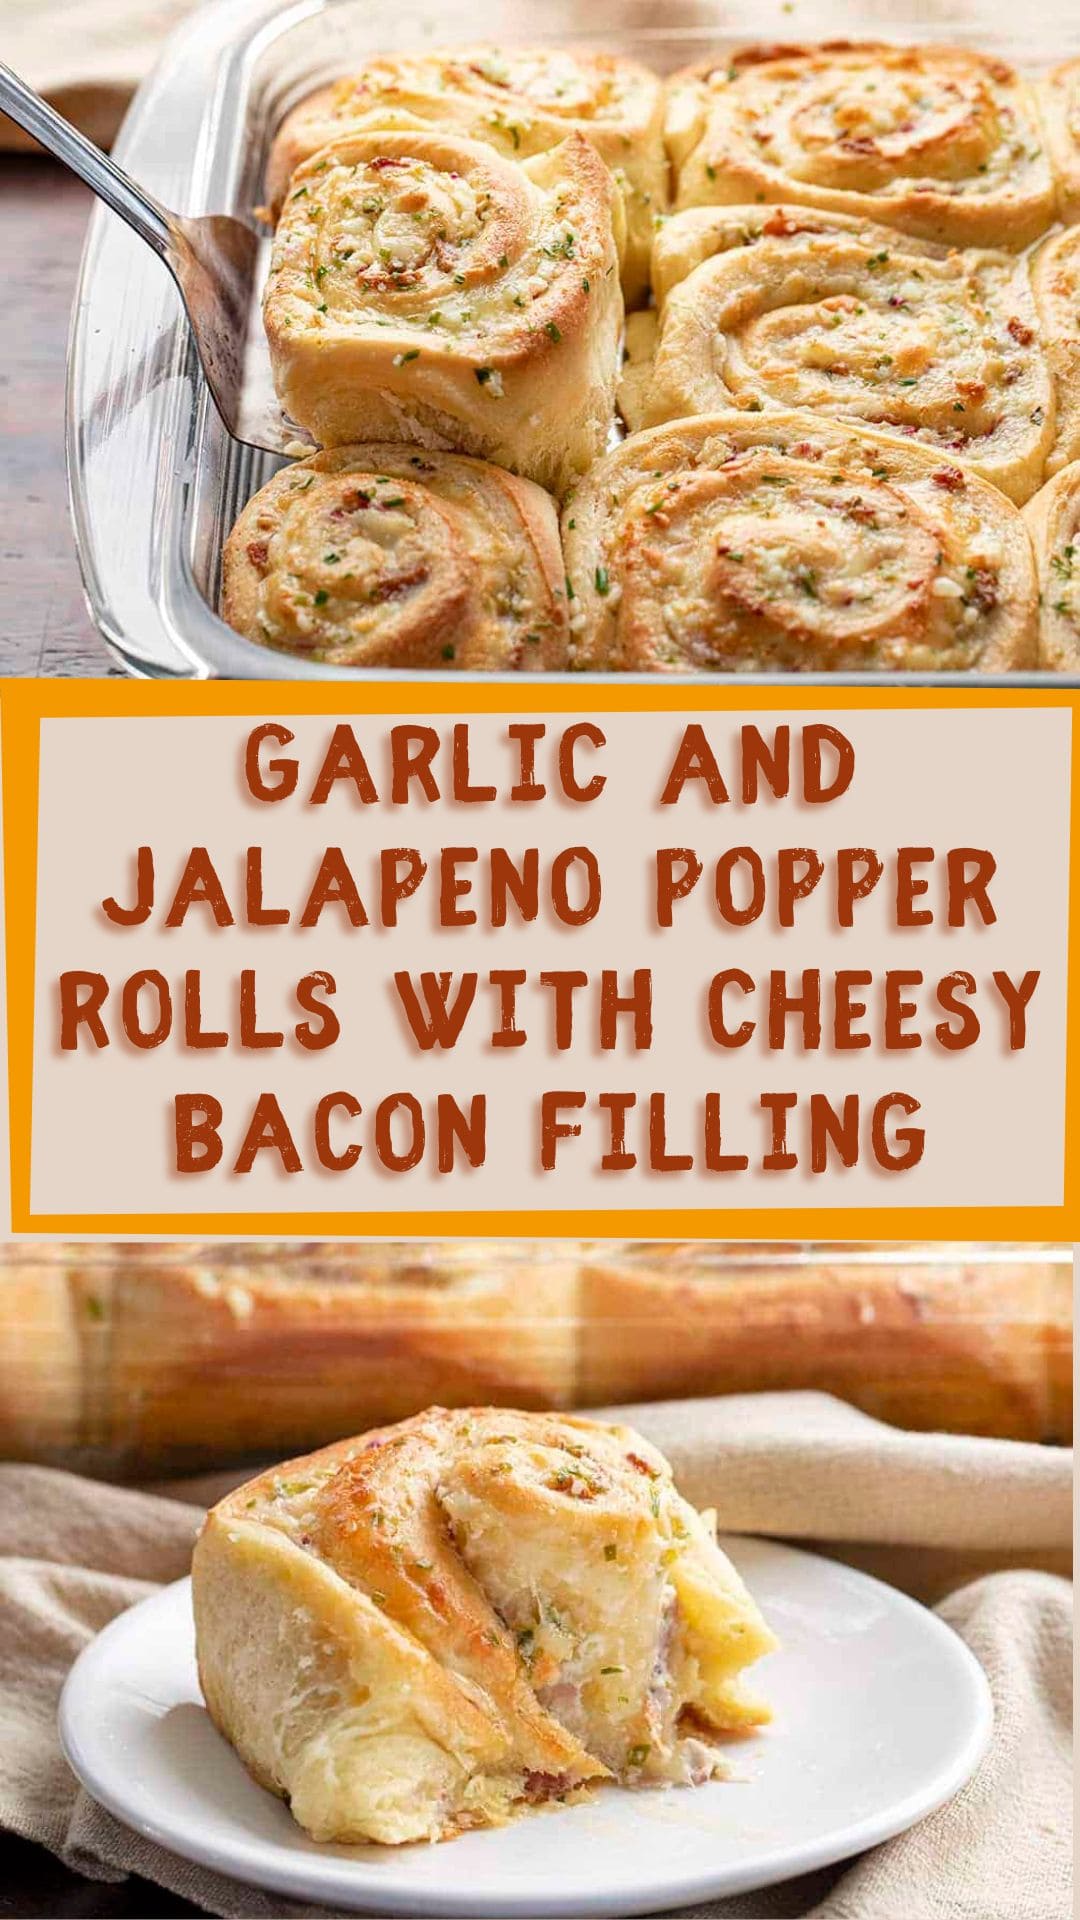 Garlic and Jalapeno Popper Rolls with Cheesy Bacon Filling